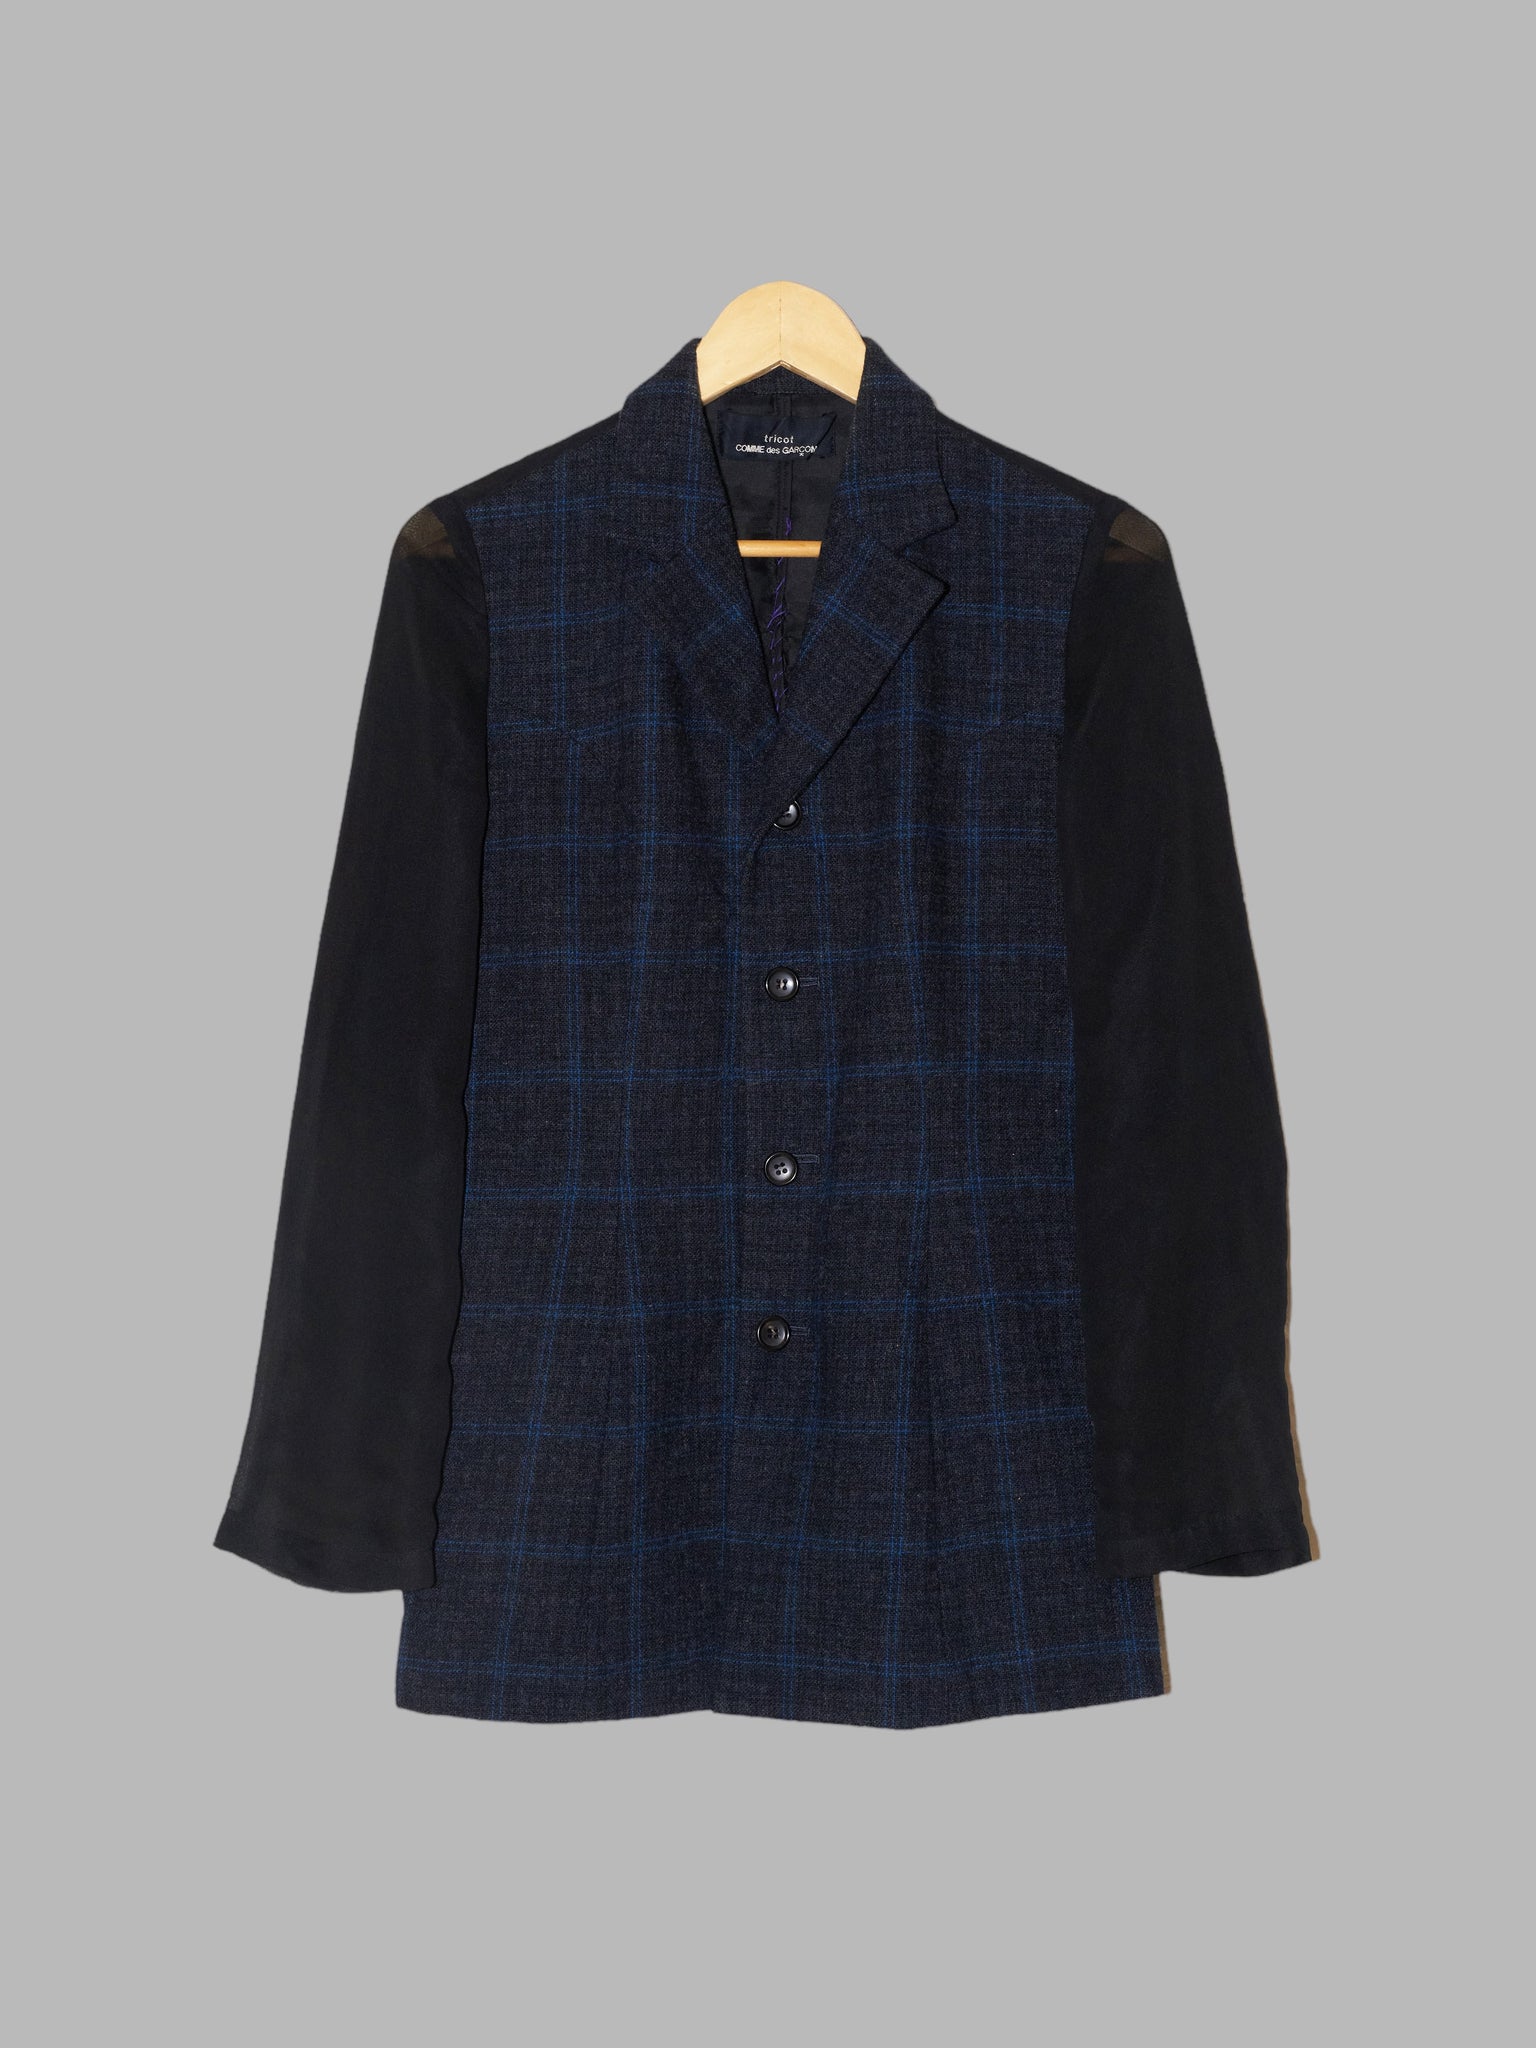 Tricot Comme des Garcons 1997 plaid wool blazer with sheer back and sleeves